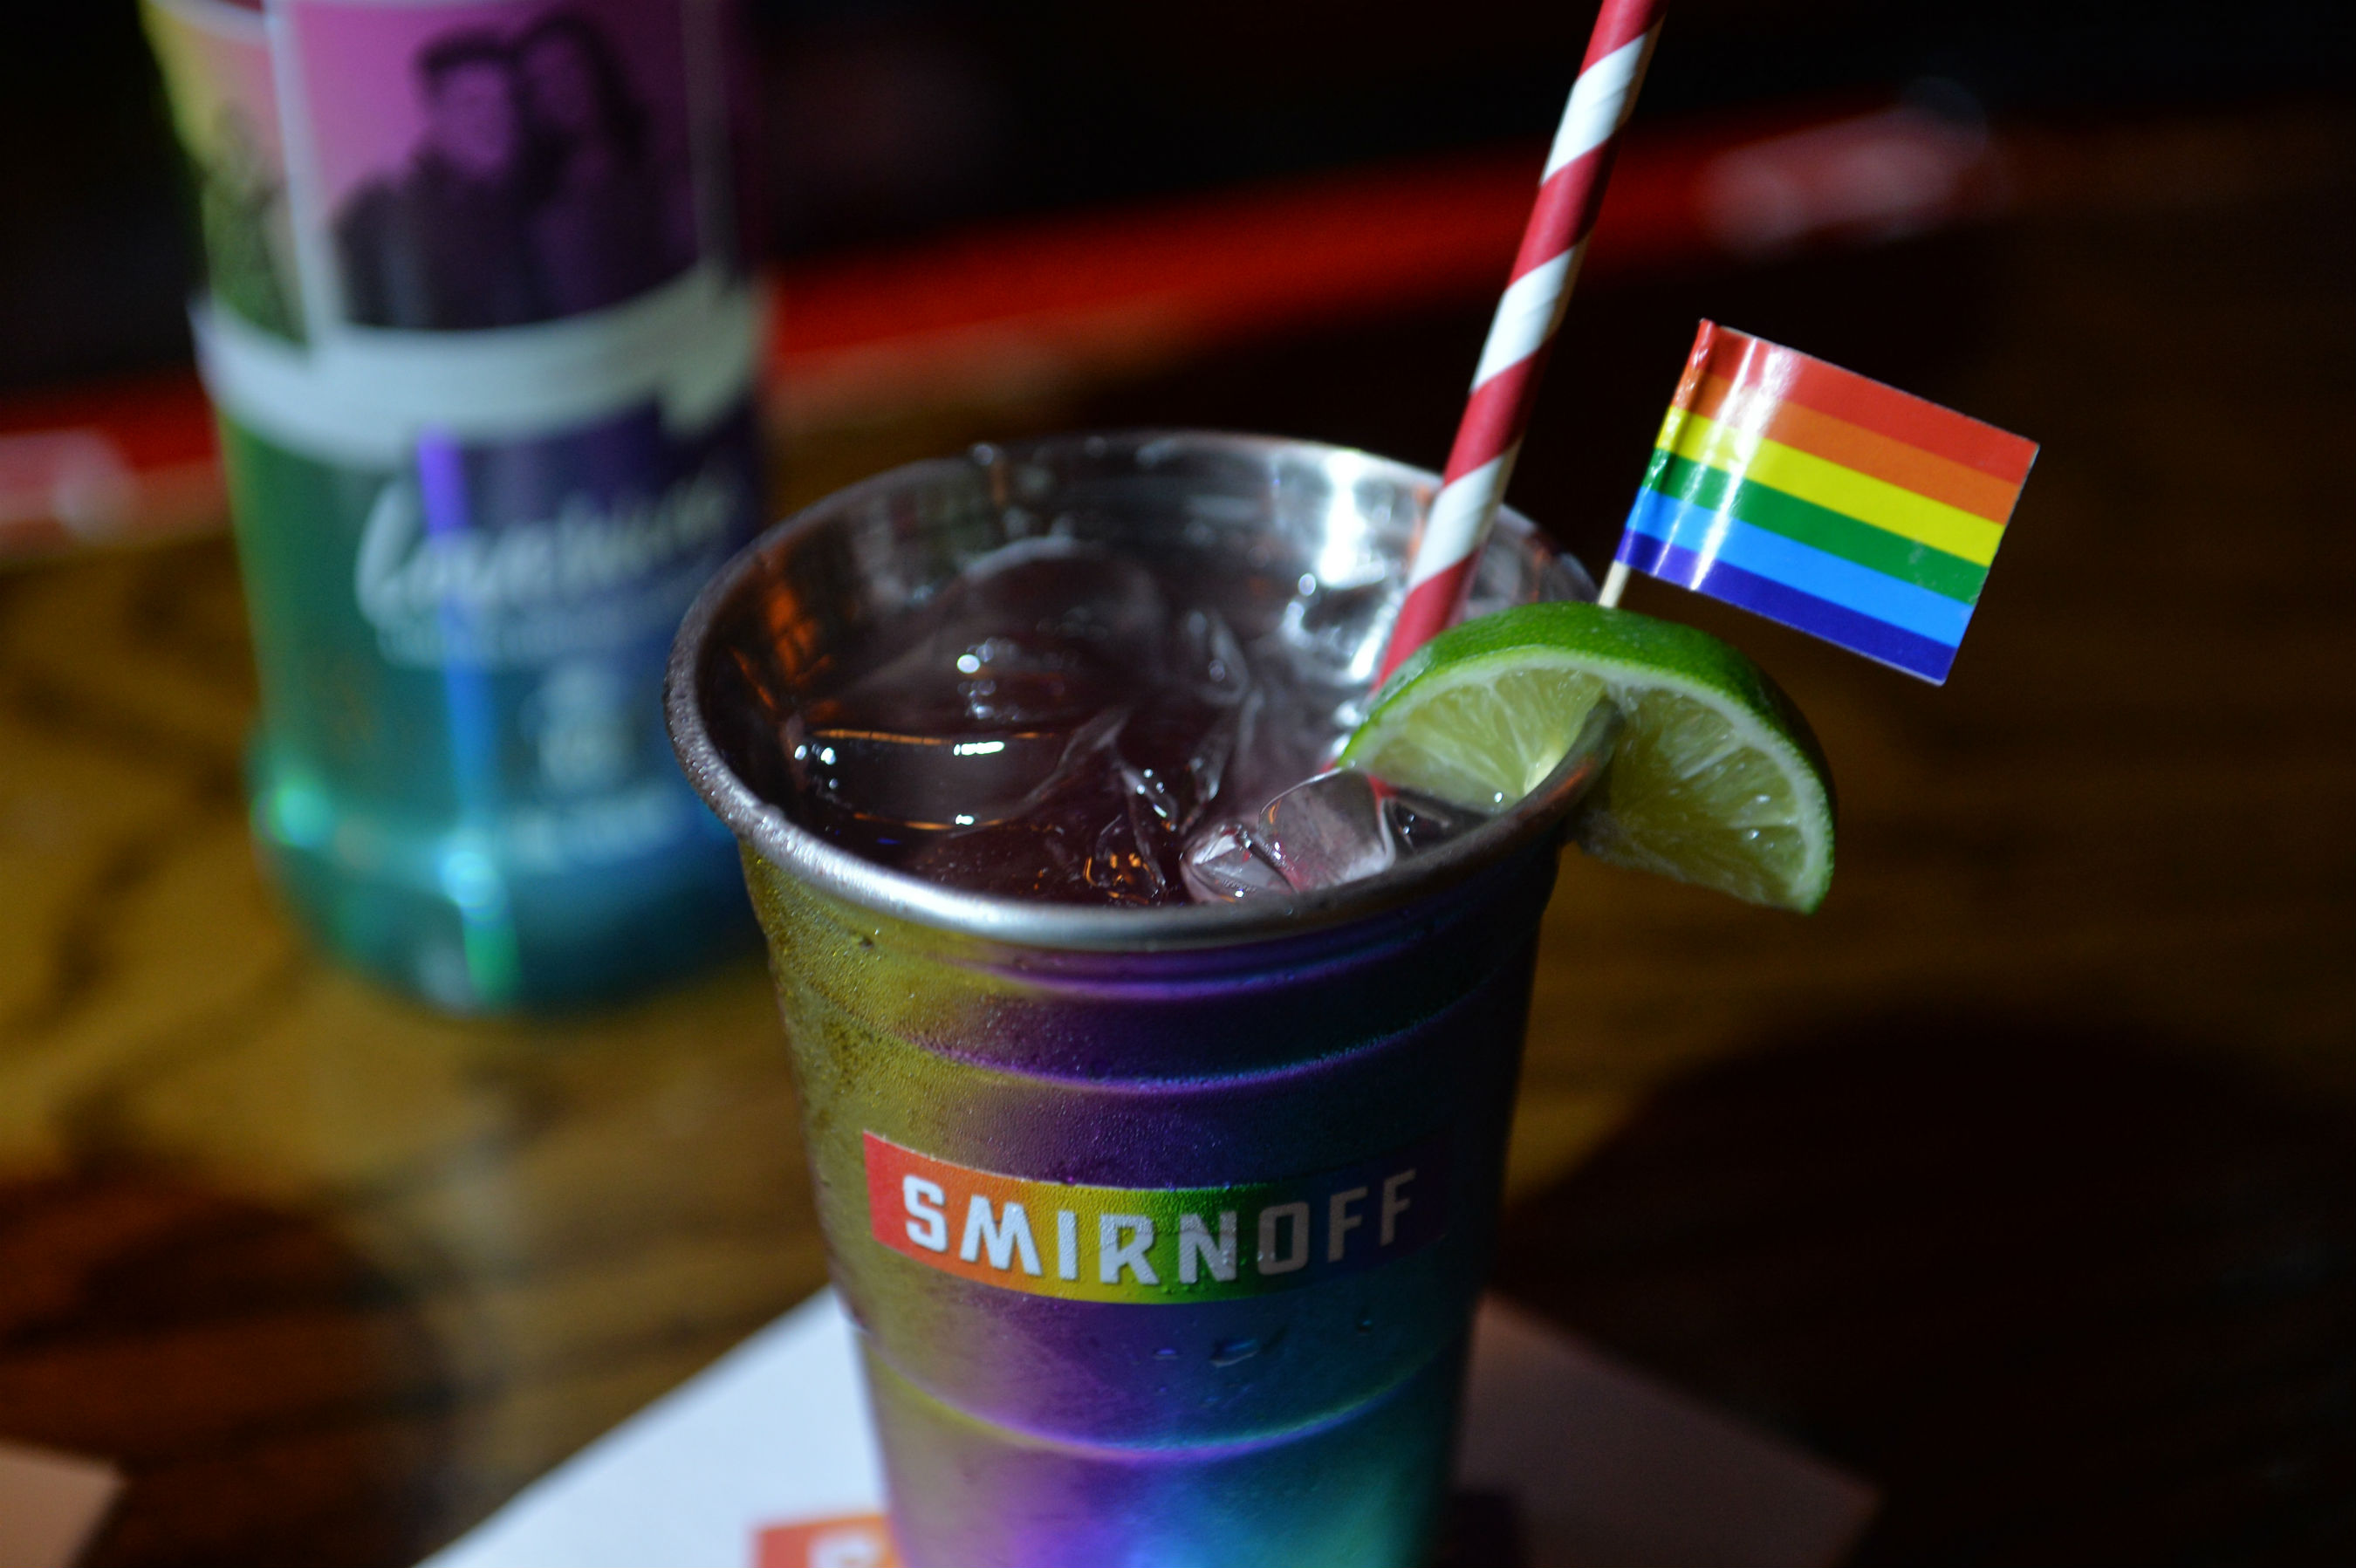 SMIRNOFF serves the “Love Wins” cocktail at the brand’s launch event for the limited edition bottle of SMIRNOFF No. 21 Vodka “Love Wins” to celebrate inclusivity and love in all its forms in New York City on Thursday, May 18, 2017.